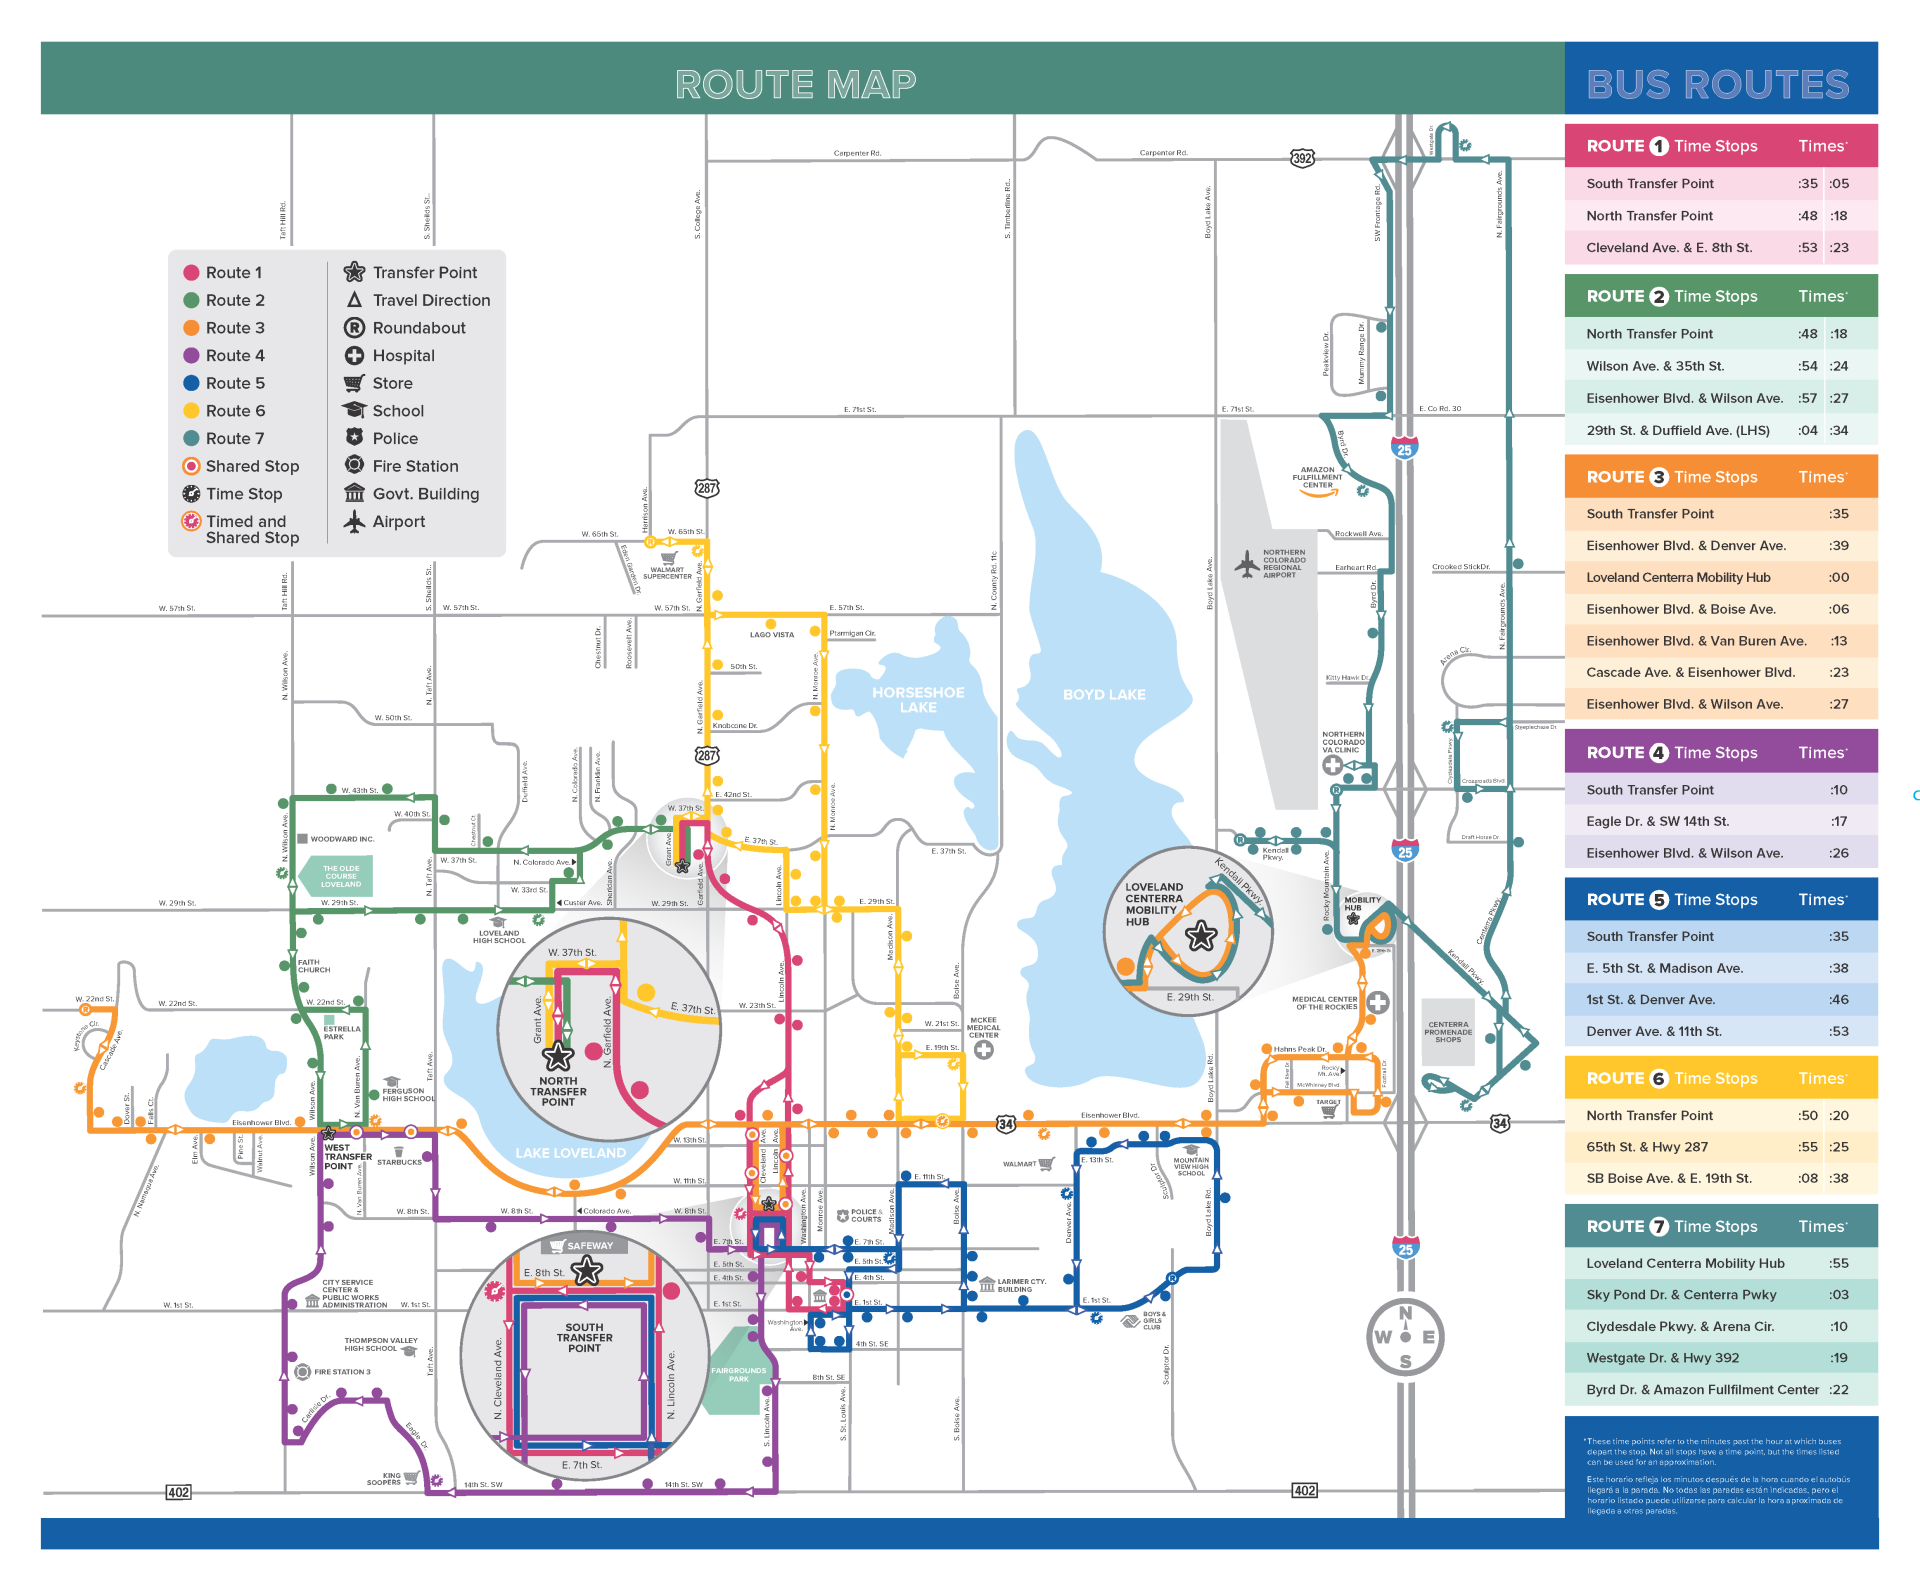 COLT service map showing the 7 transit routes that operate Monday through Saturday in the City of Loveland